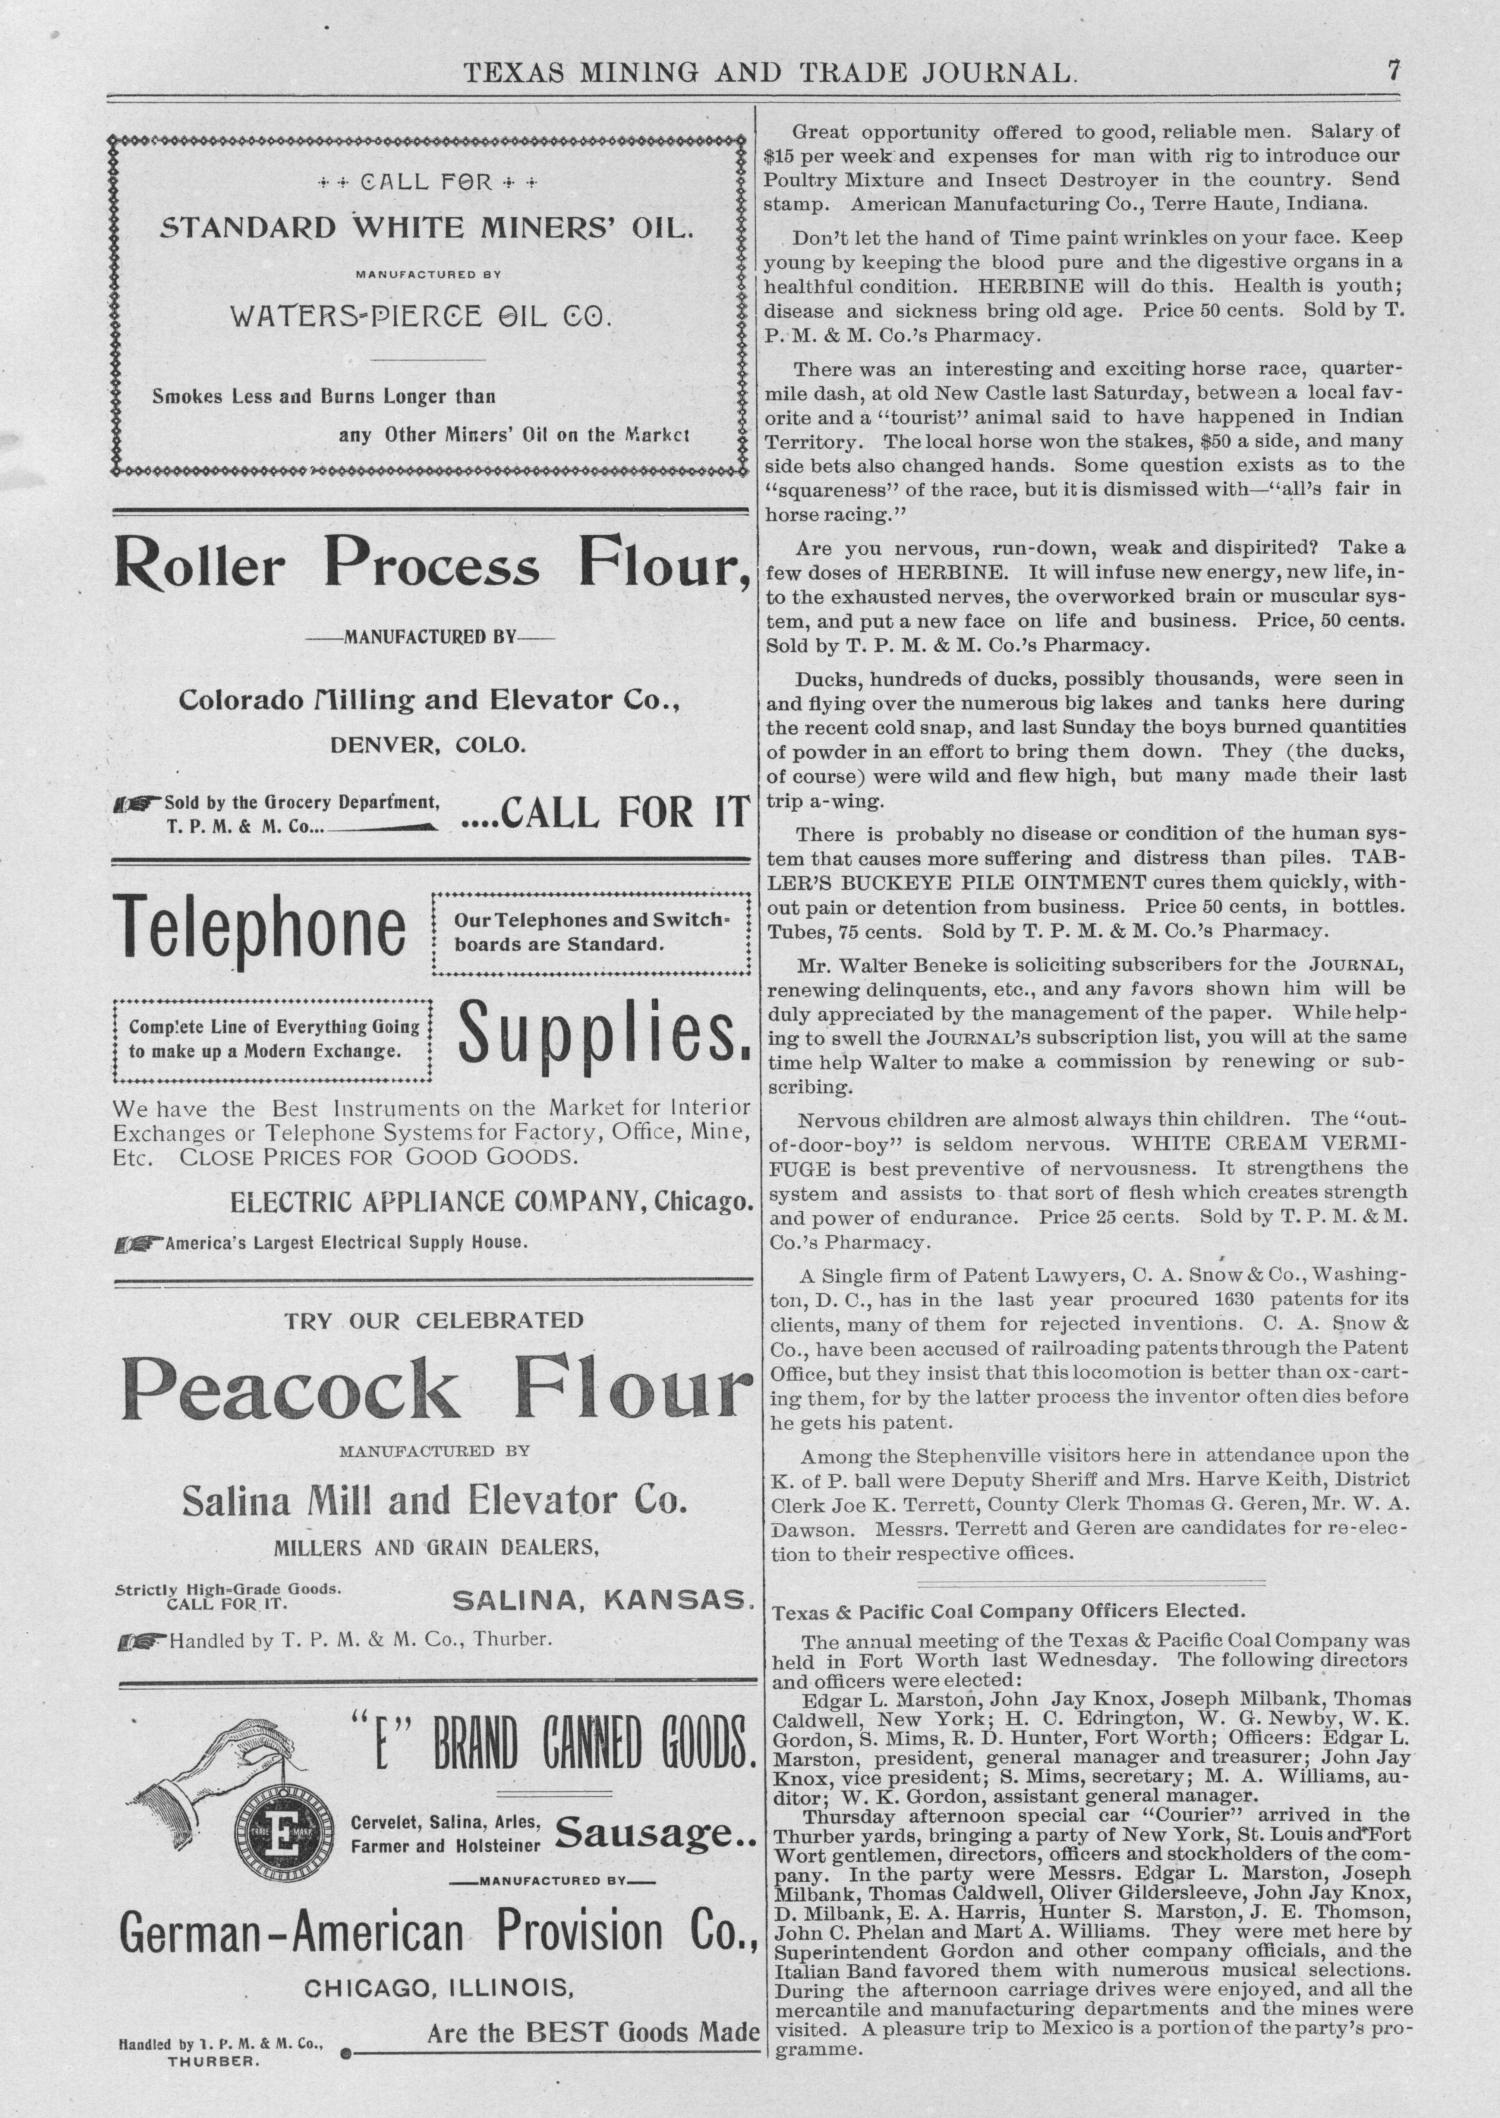 Texas Mining and Trade Journal, Volume 4, Number 32, Saturday, February 24, 1900
                                                
                                                    7
                                                